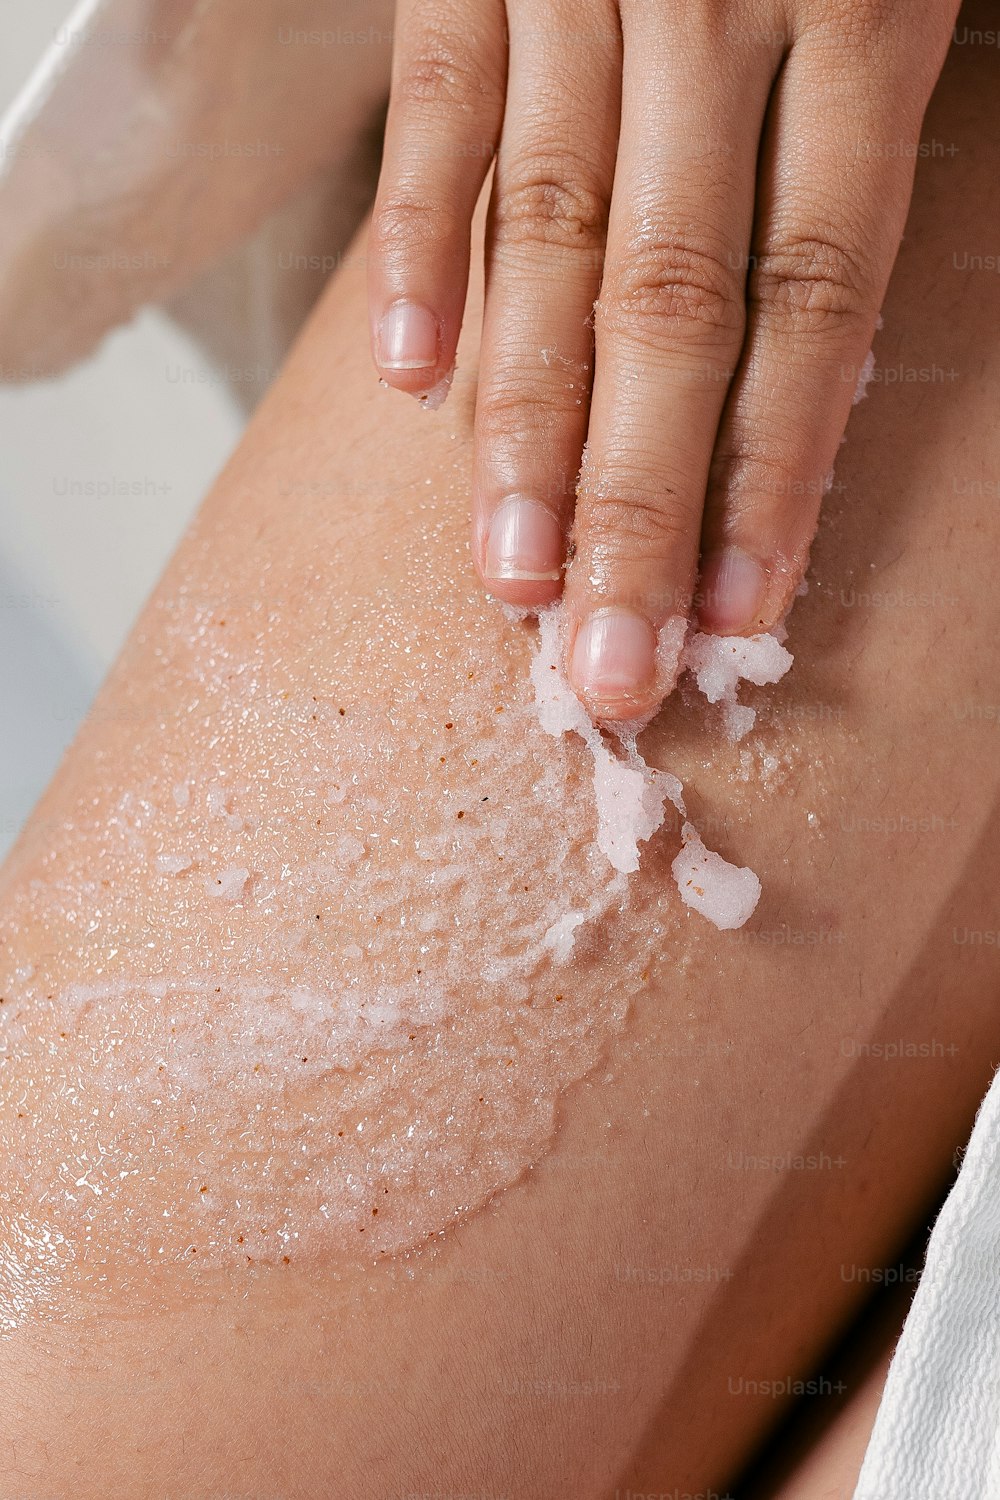 a close up of a person's legs with a lot of white stuff on